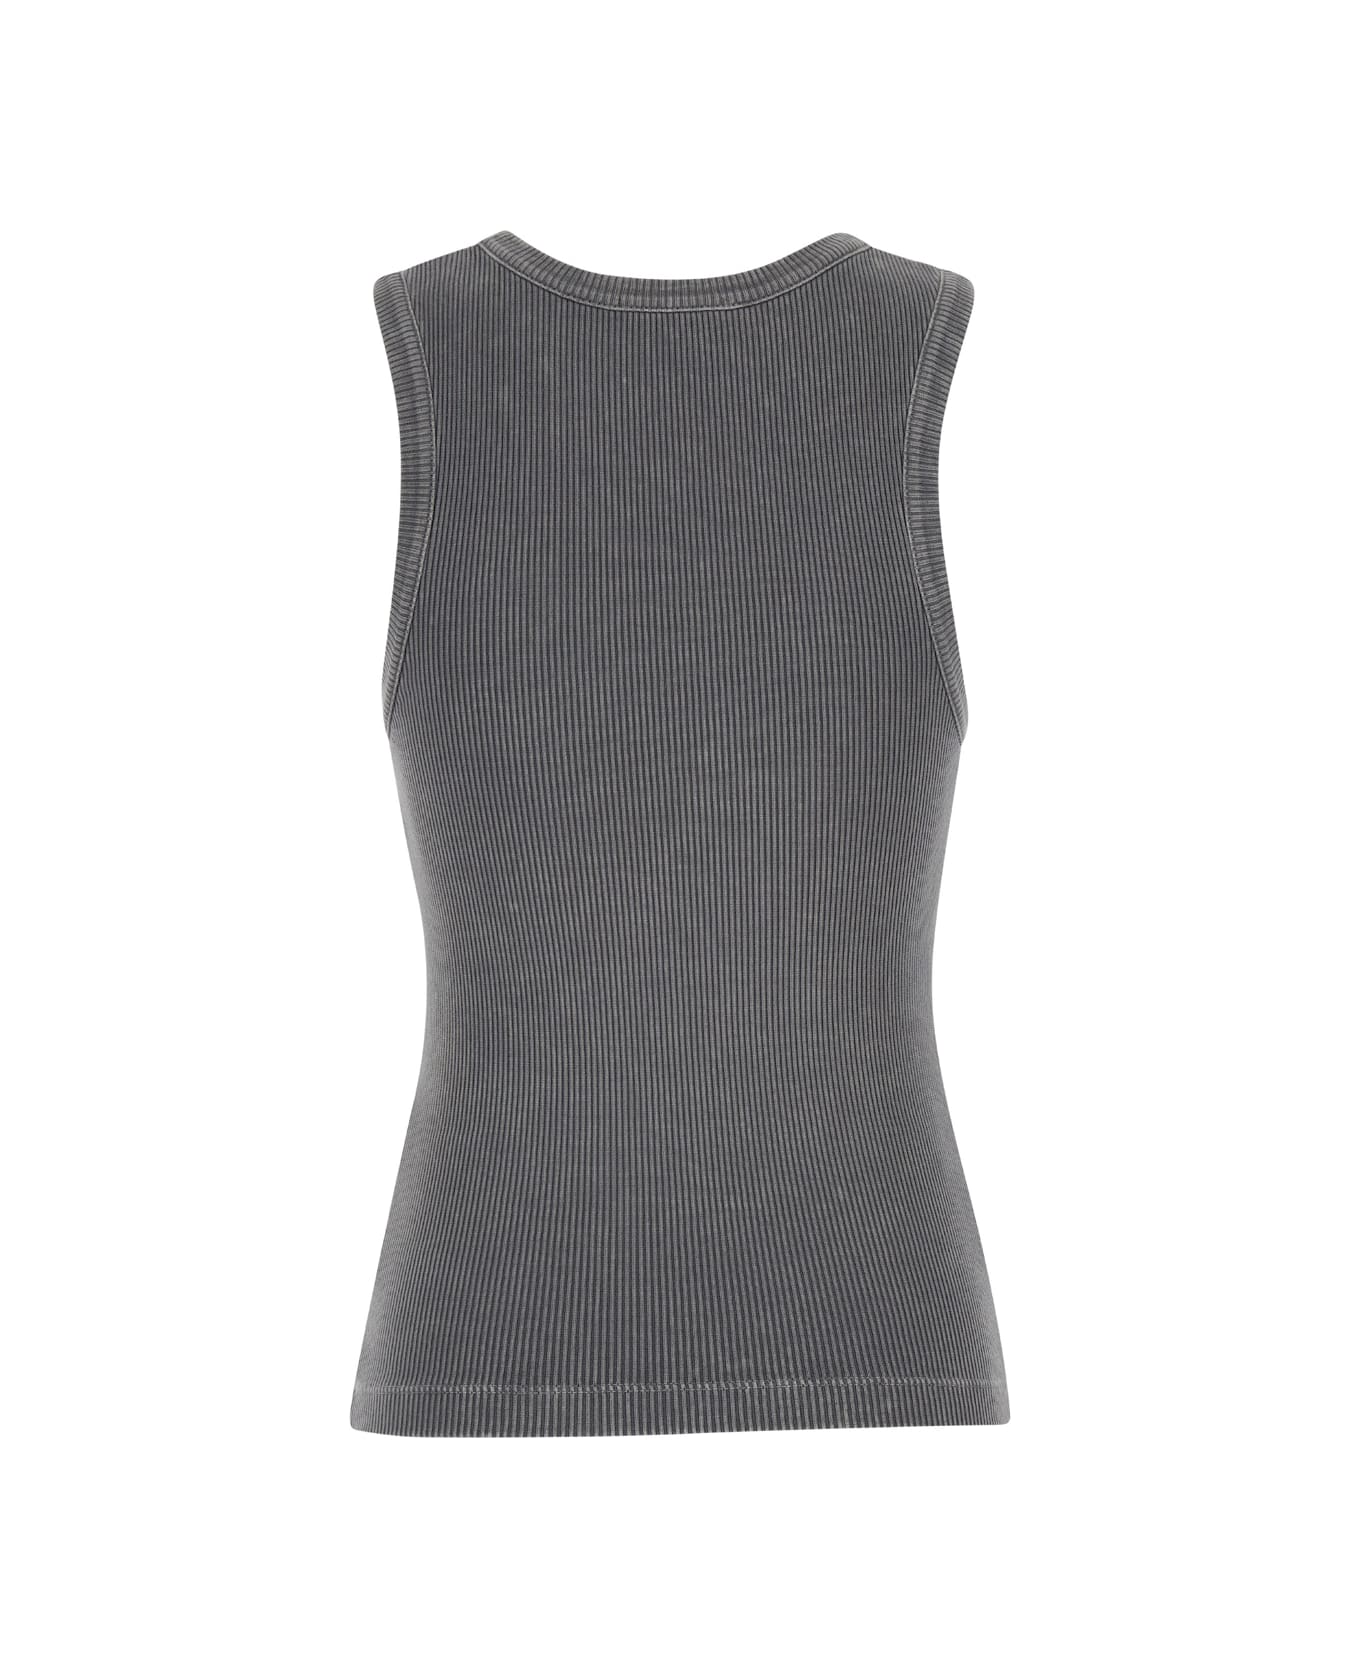 AGOLDE Grey Ribbed Tank Top In Cotton Blend Woman - Grey